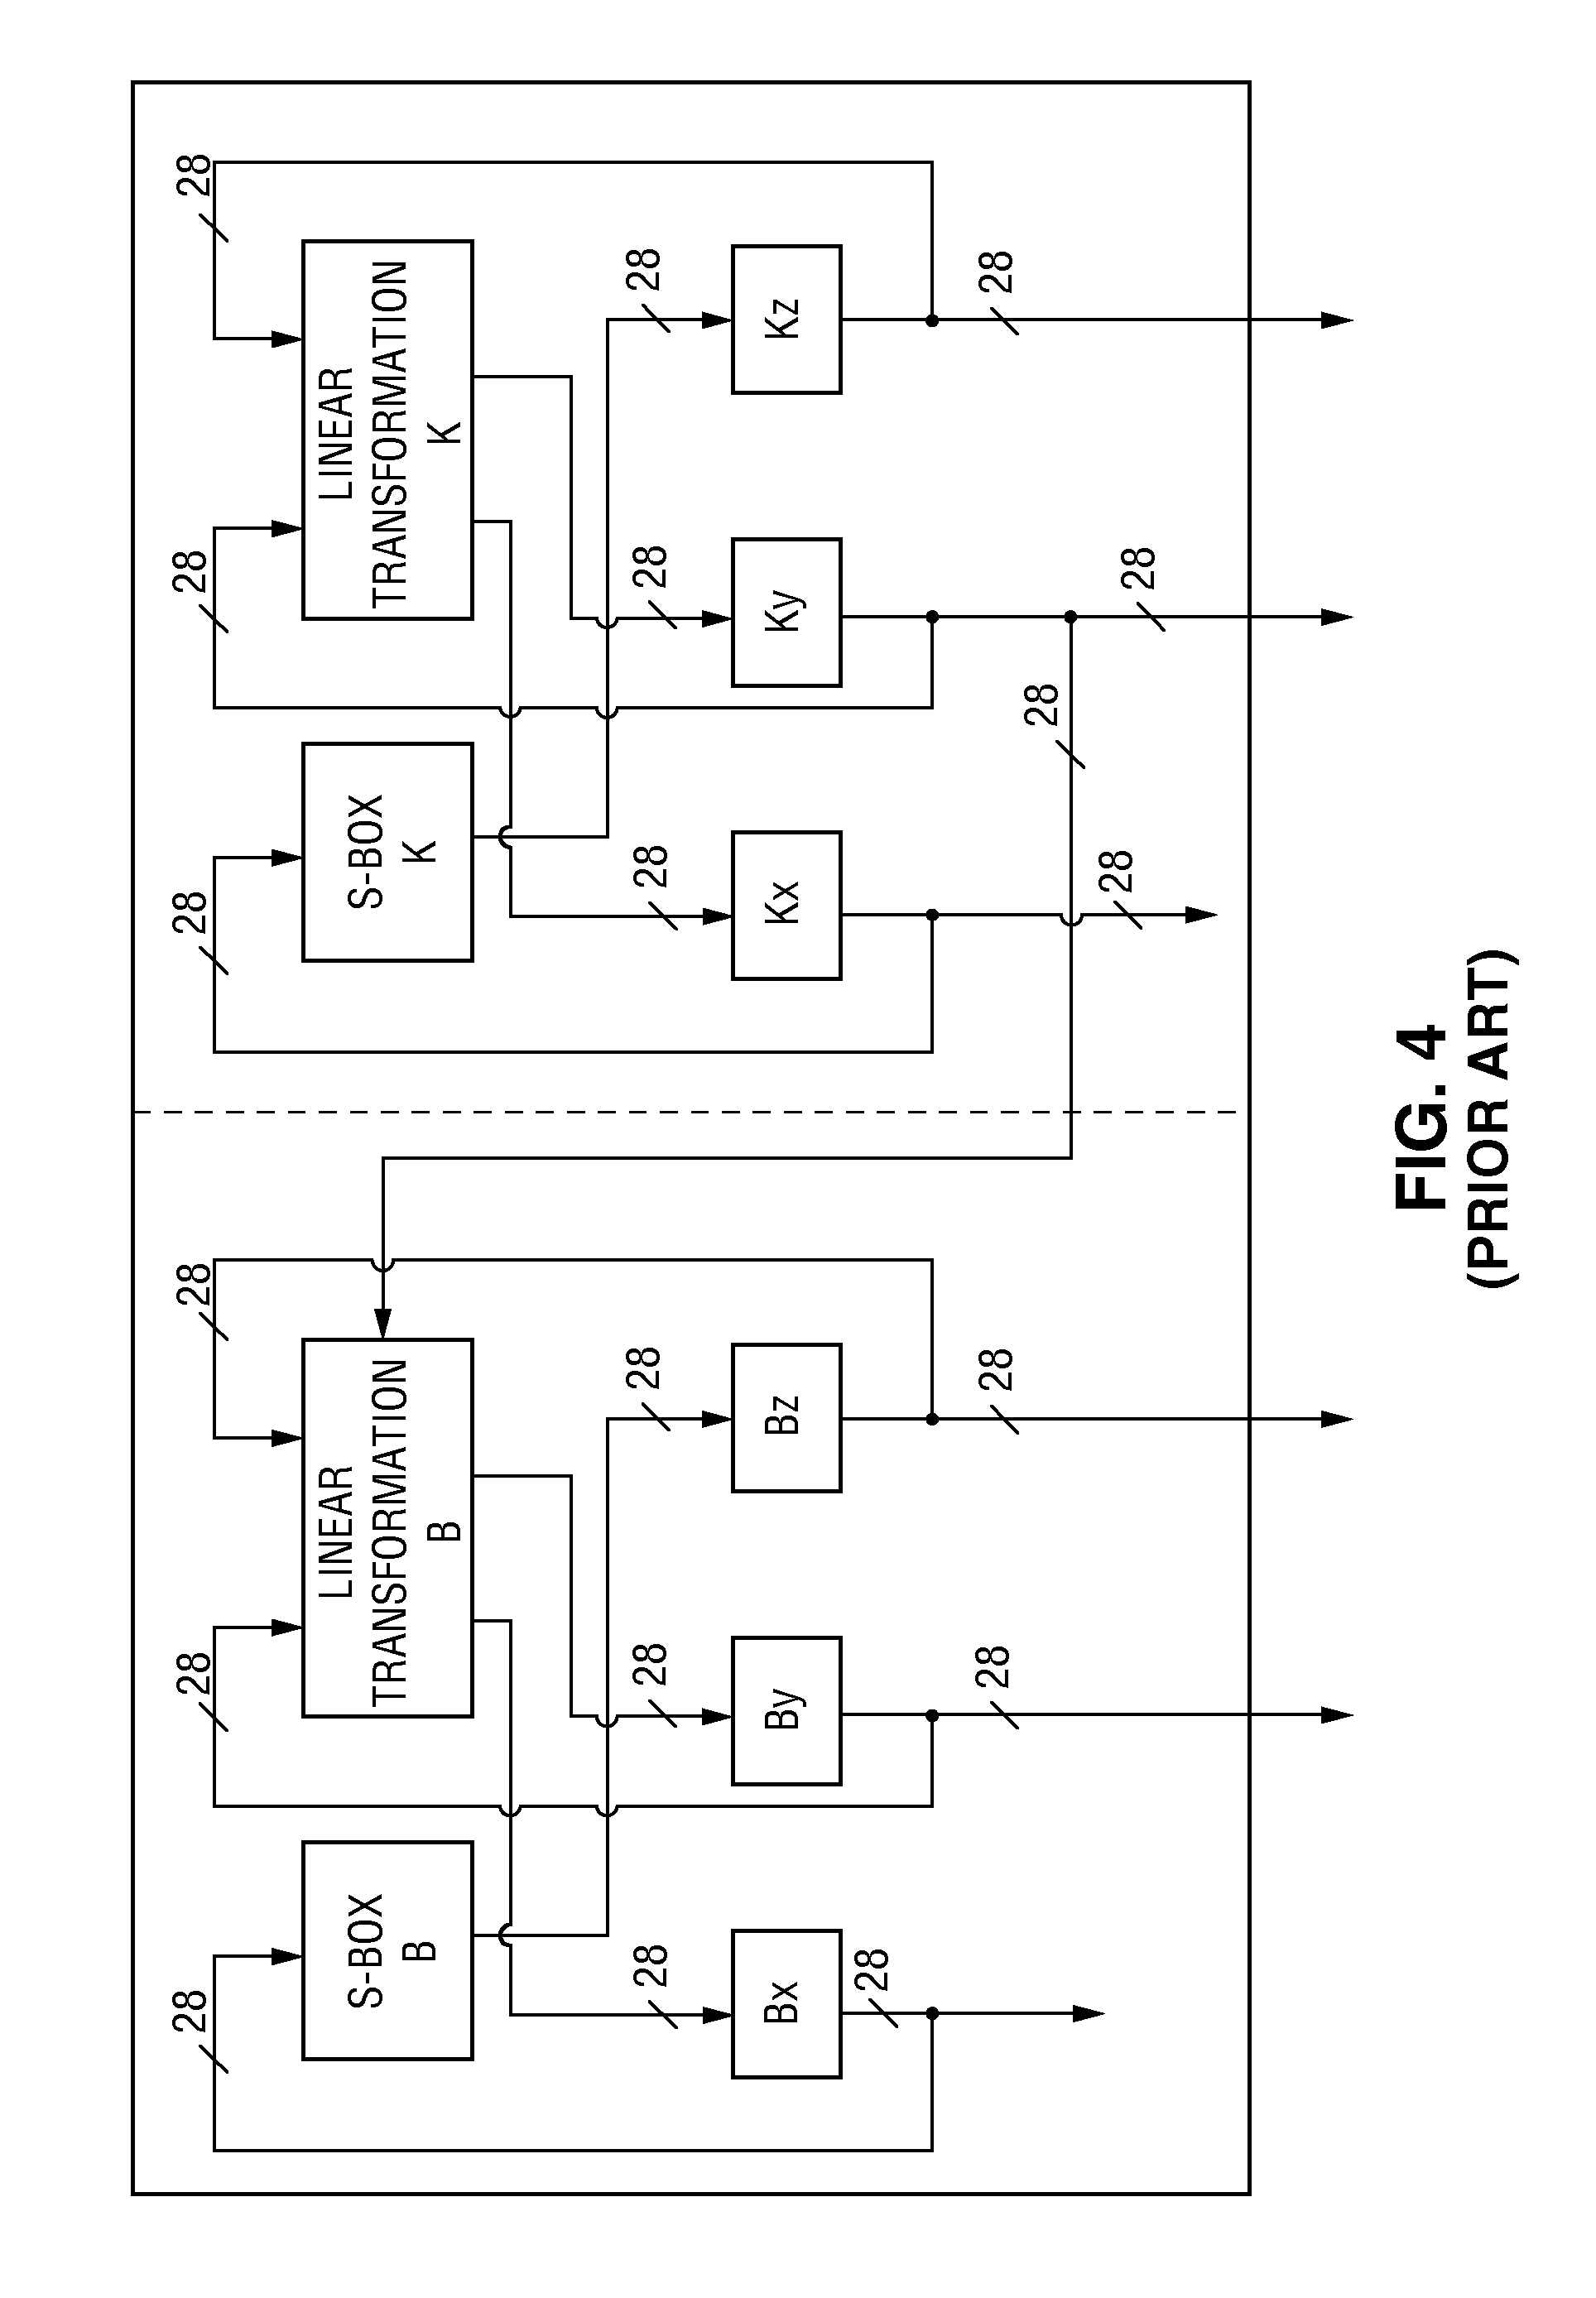 Cryptographic device with stored key data and method for using stored key data to perform an authentication exchange or self test